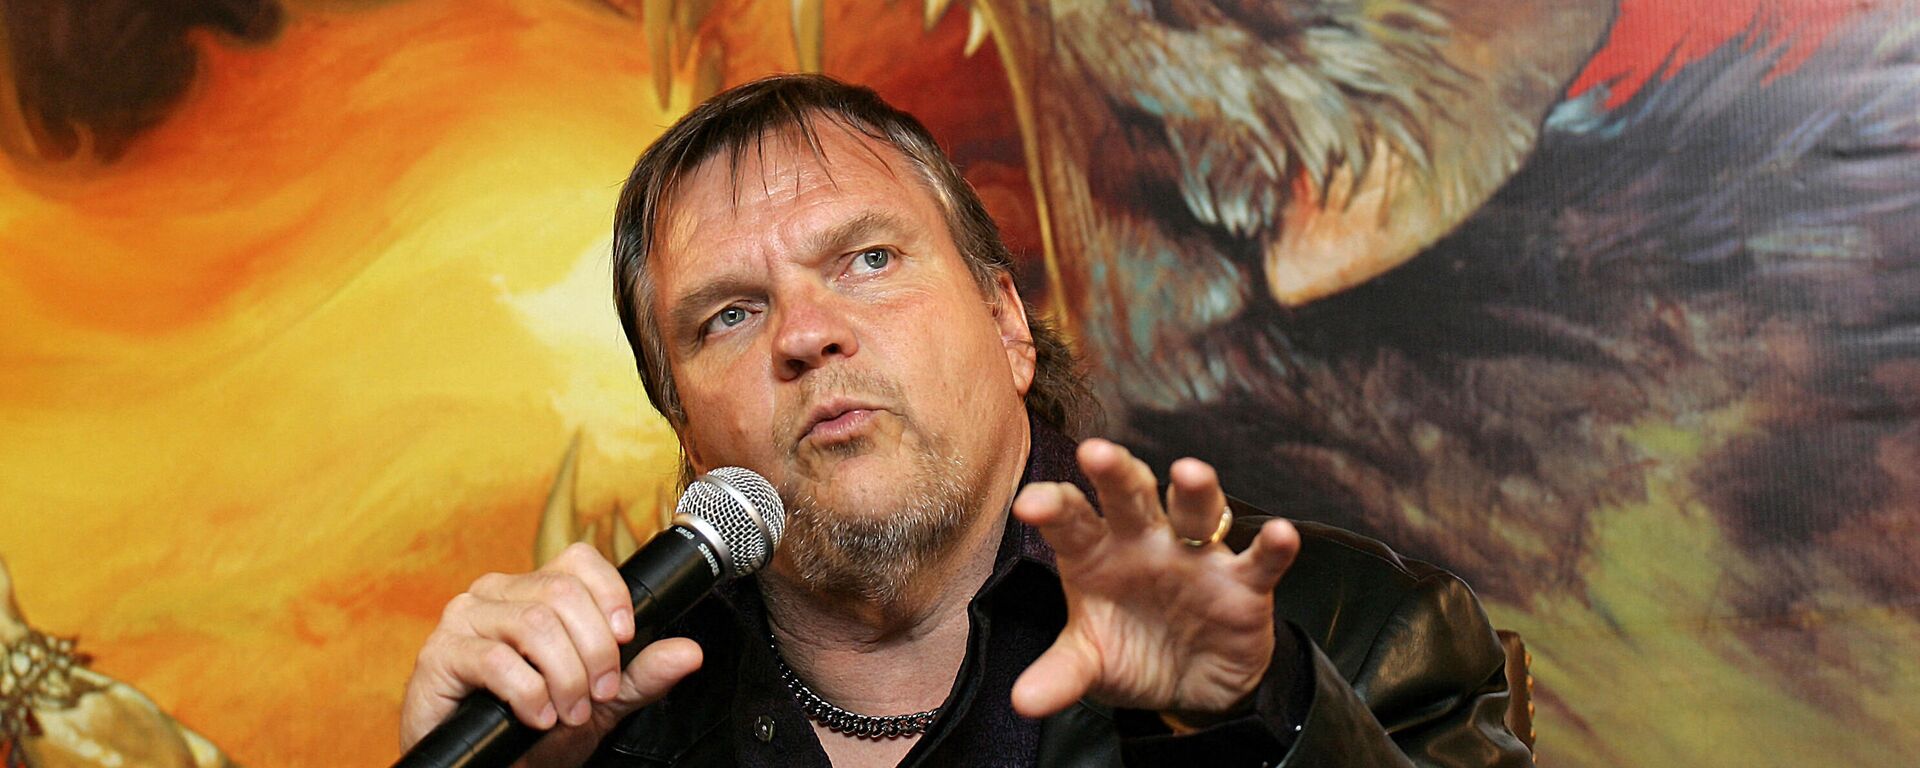 (FILES) This file photo taken on September 4, 2006 shows US singer Marvin Lee Aday, popularly known as Meat Loaf, gesturing as he speaks during a press conference in Hong Kong. - US singer and actor Meat Loaf, famous for his Bat Out of Hell album, has died aged 74, according to a statement on January 21, 2022 - Sputnik International, 1920, 21.01.2022